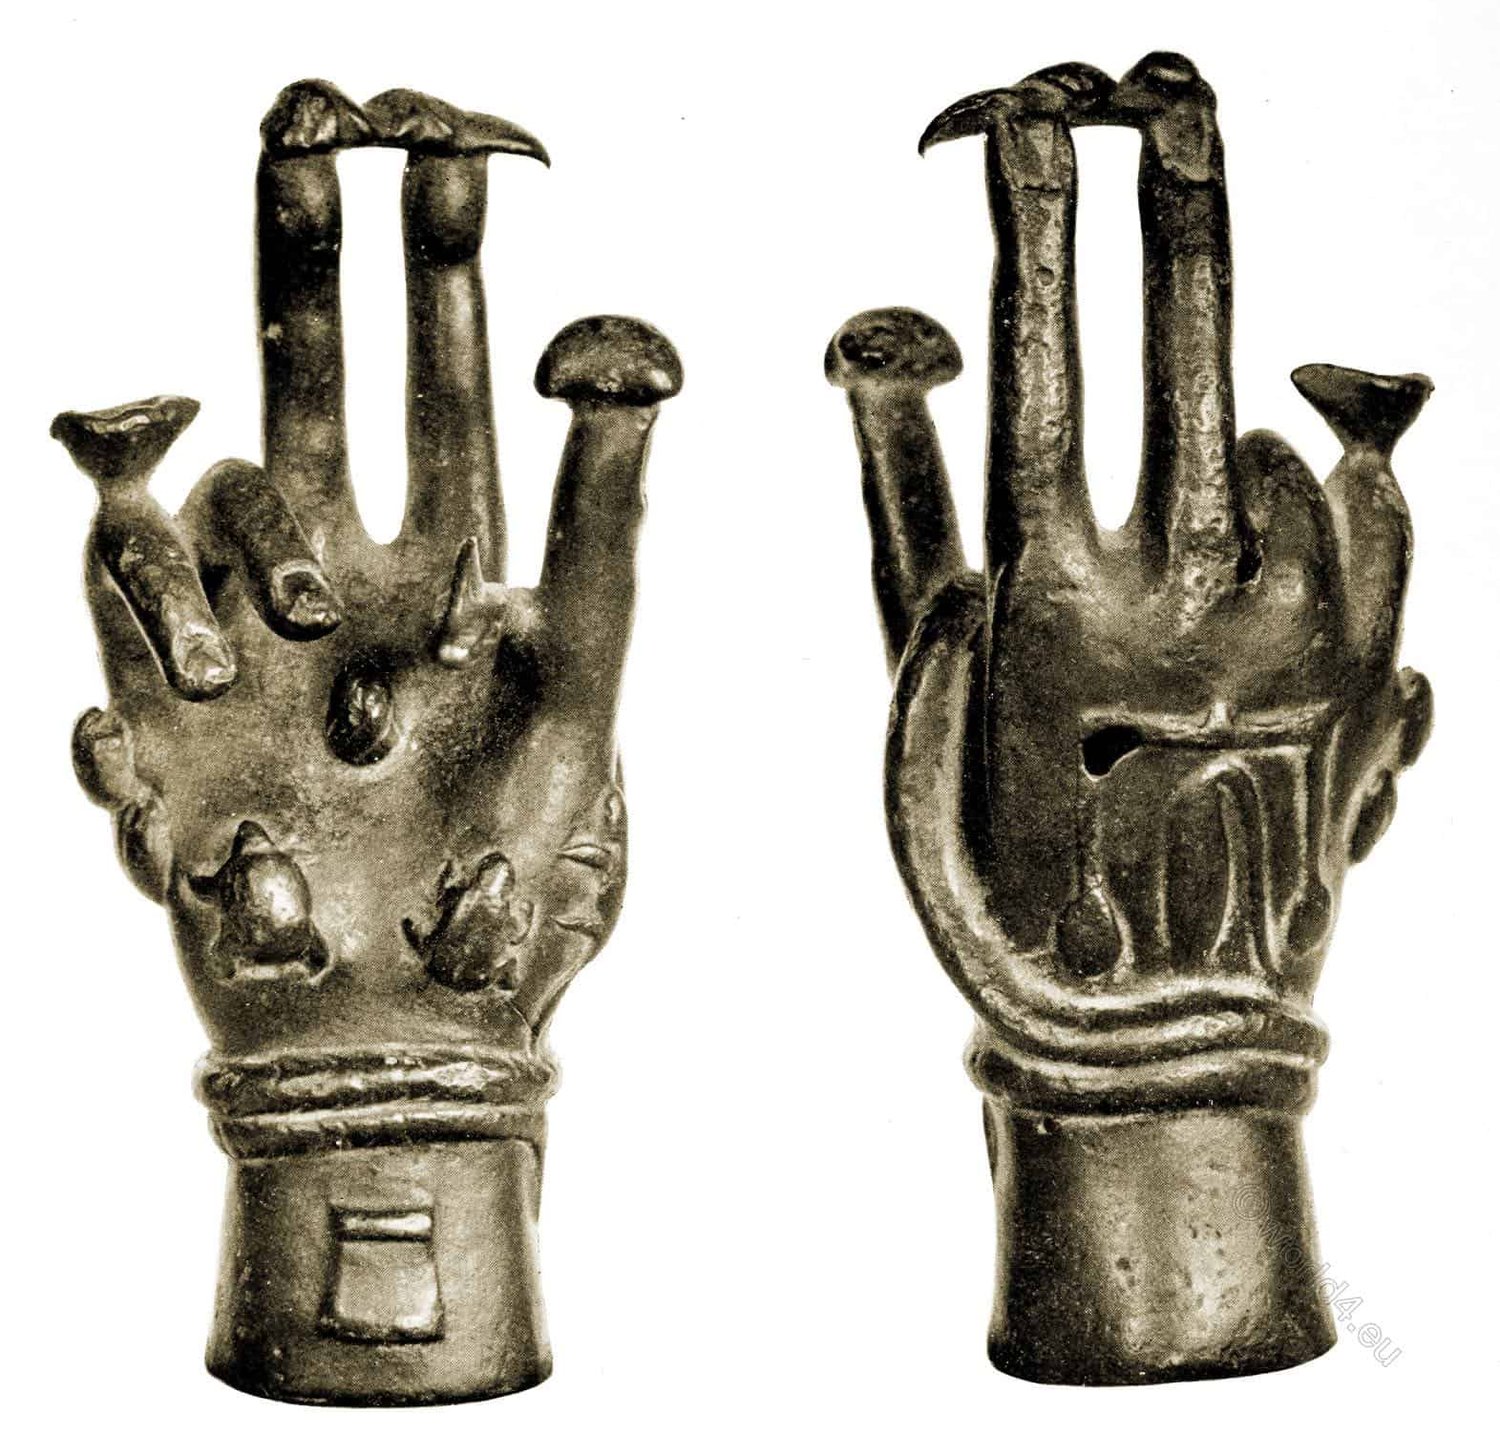 A magic hand used as an amulet for averting the evil eye.